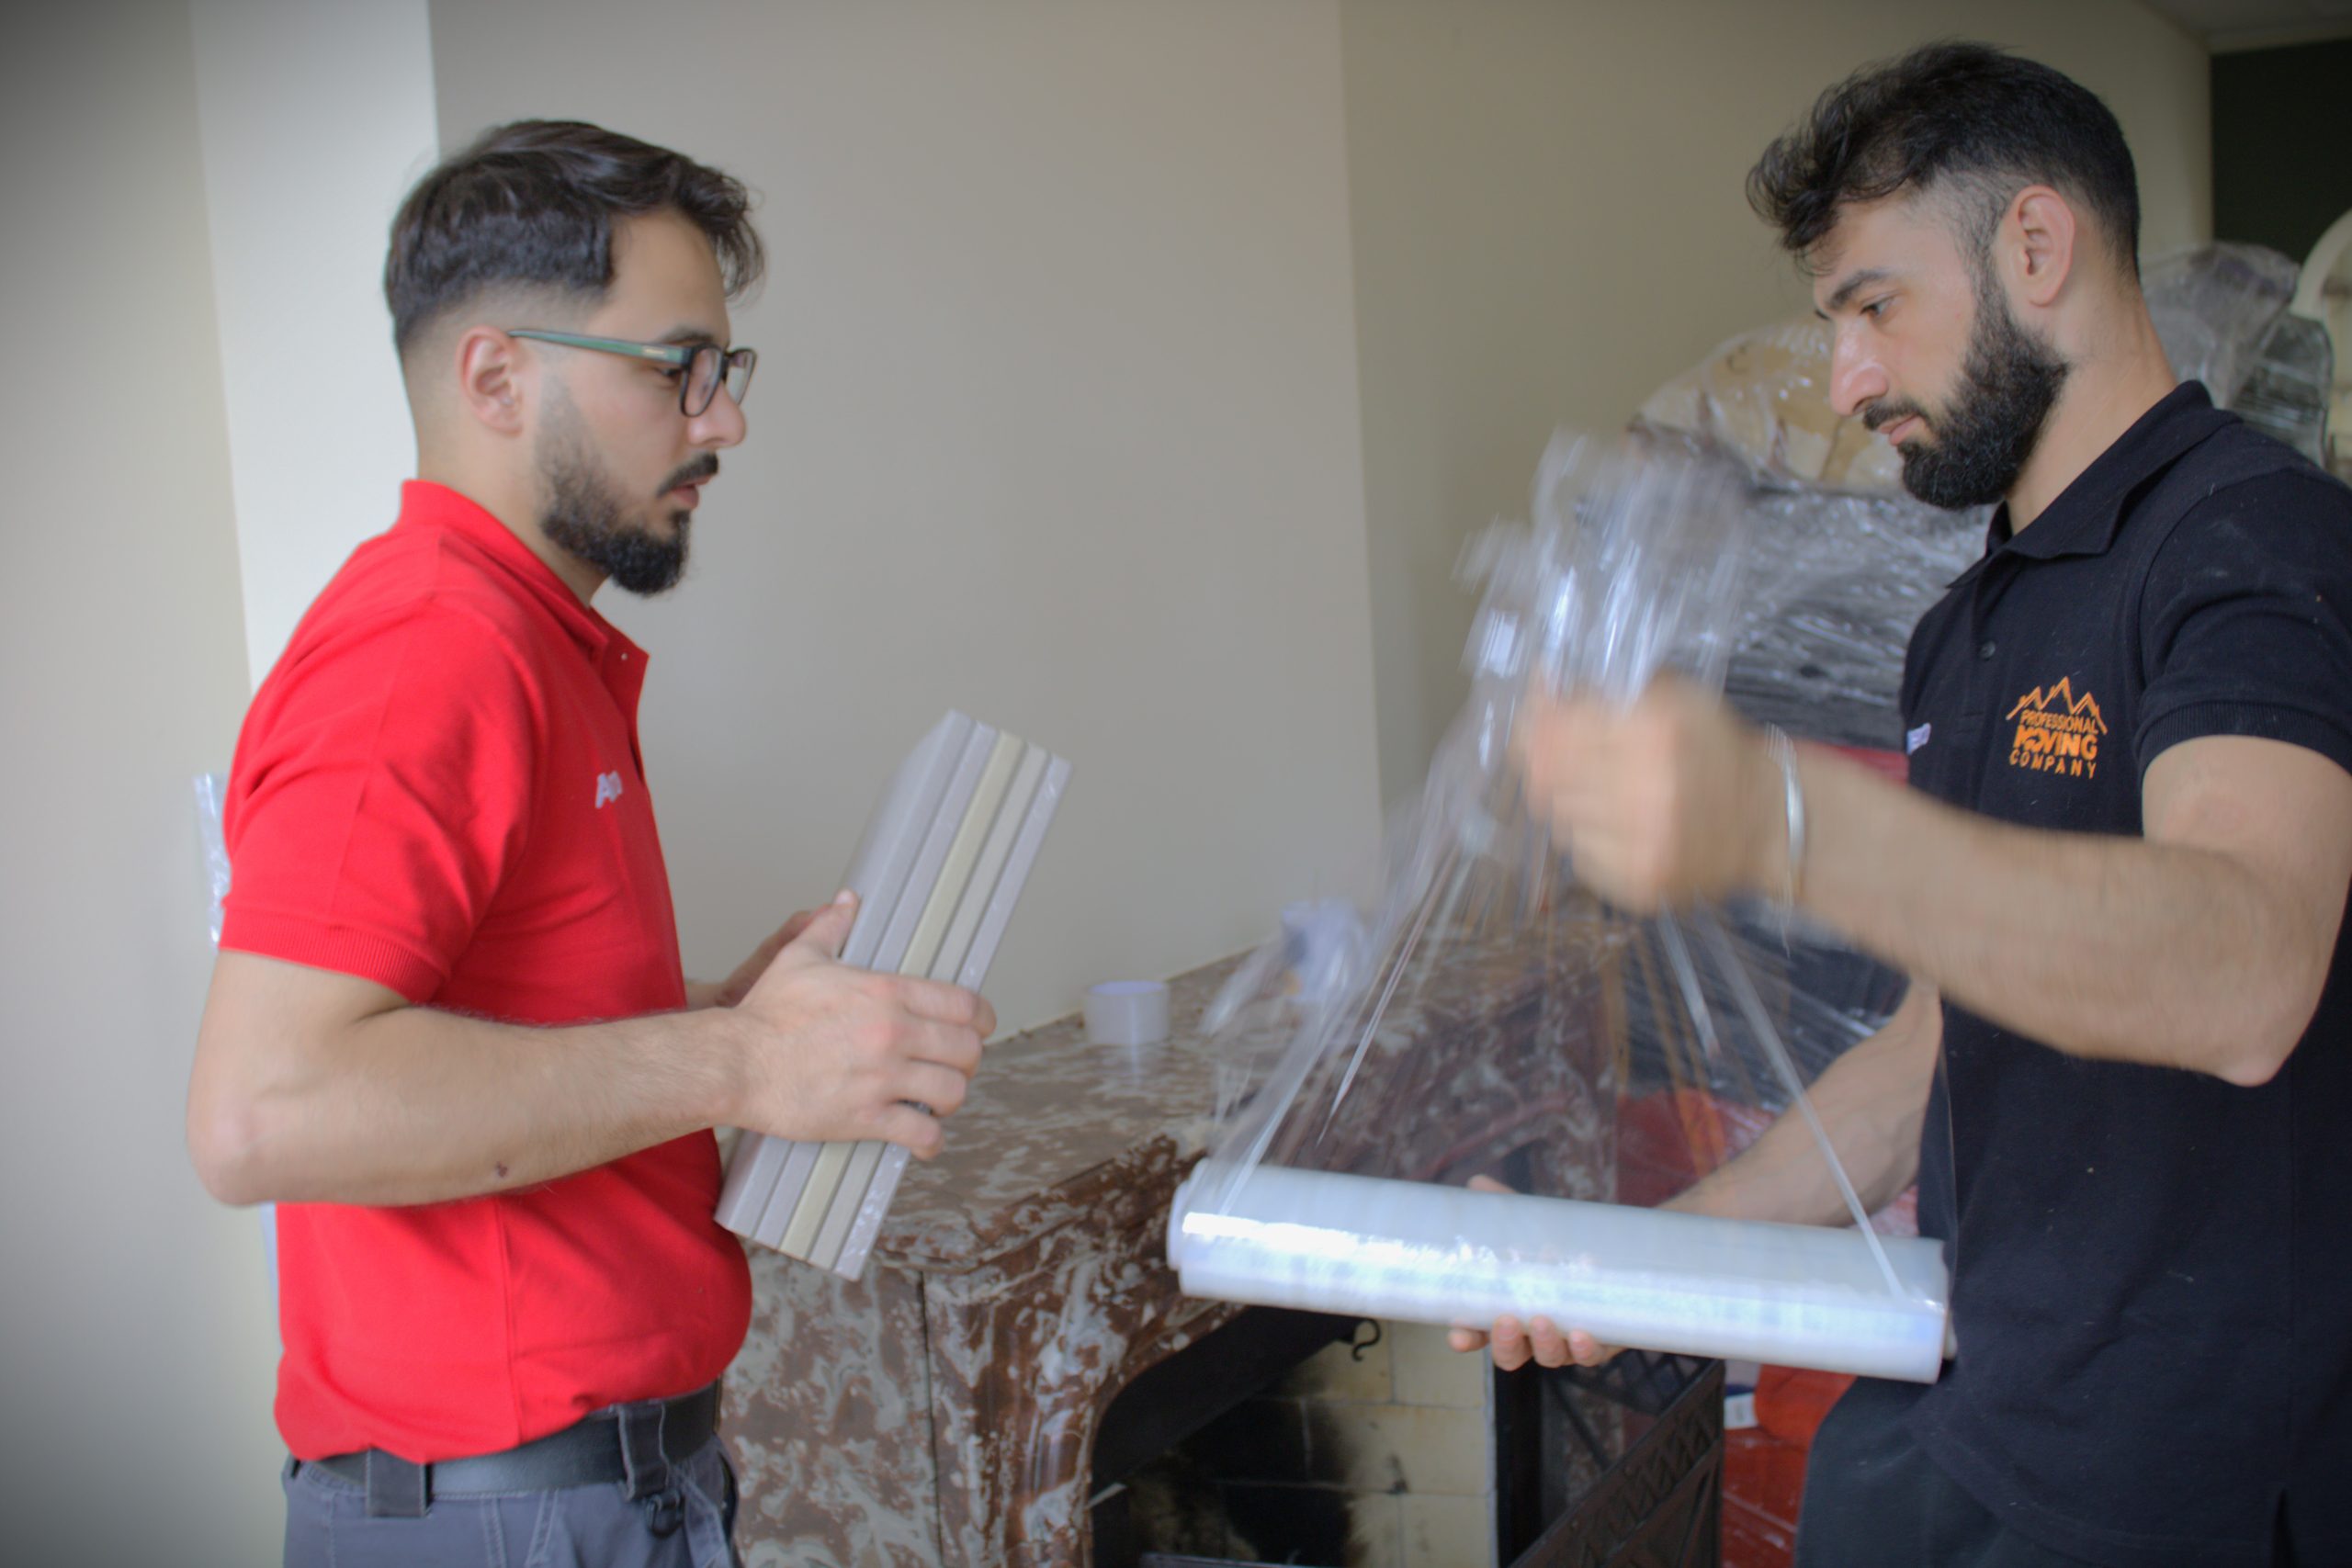 Two movers from Professional Moving Company preparing items for a move. One mover is holding packaging materials, while the other is wrapping items with plastic wrap.